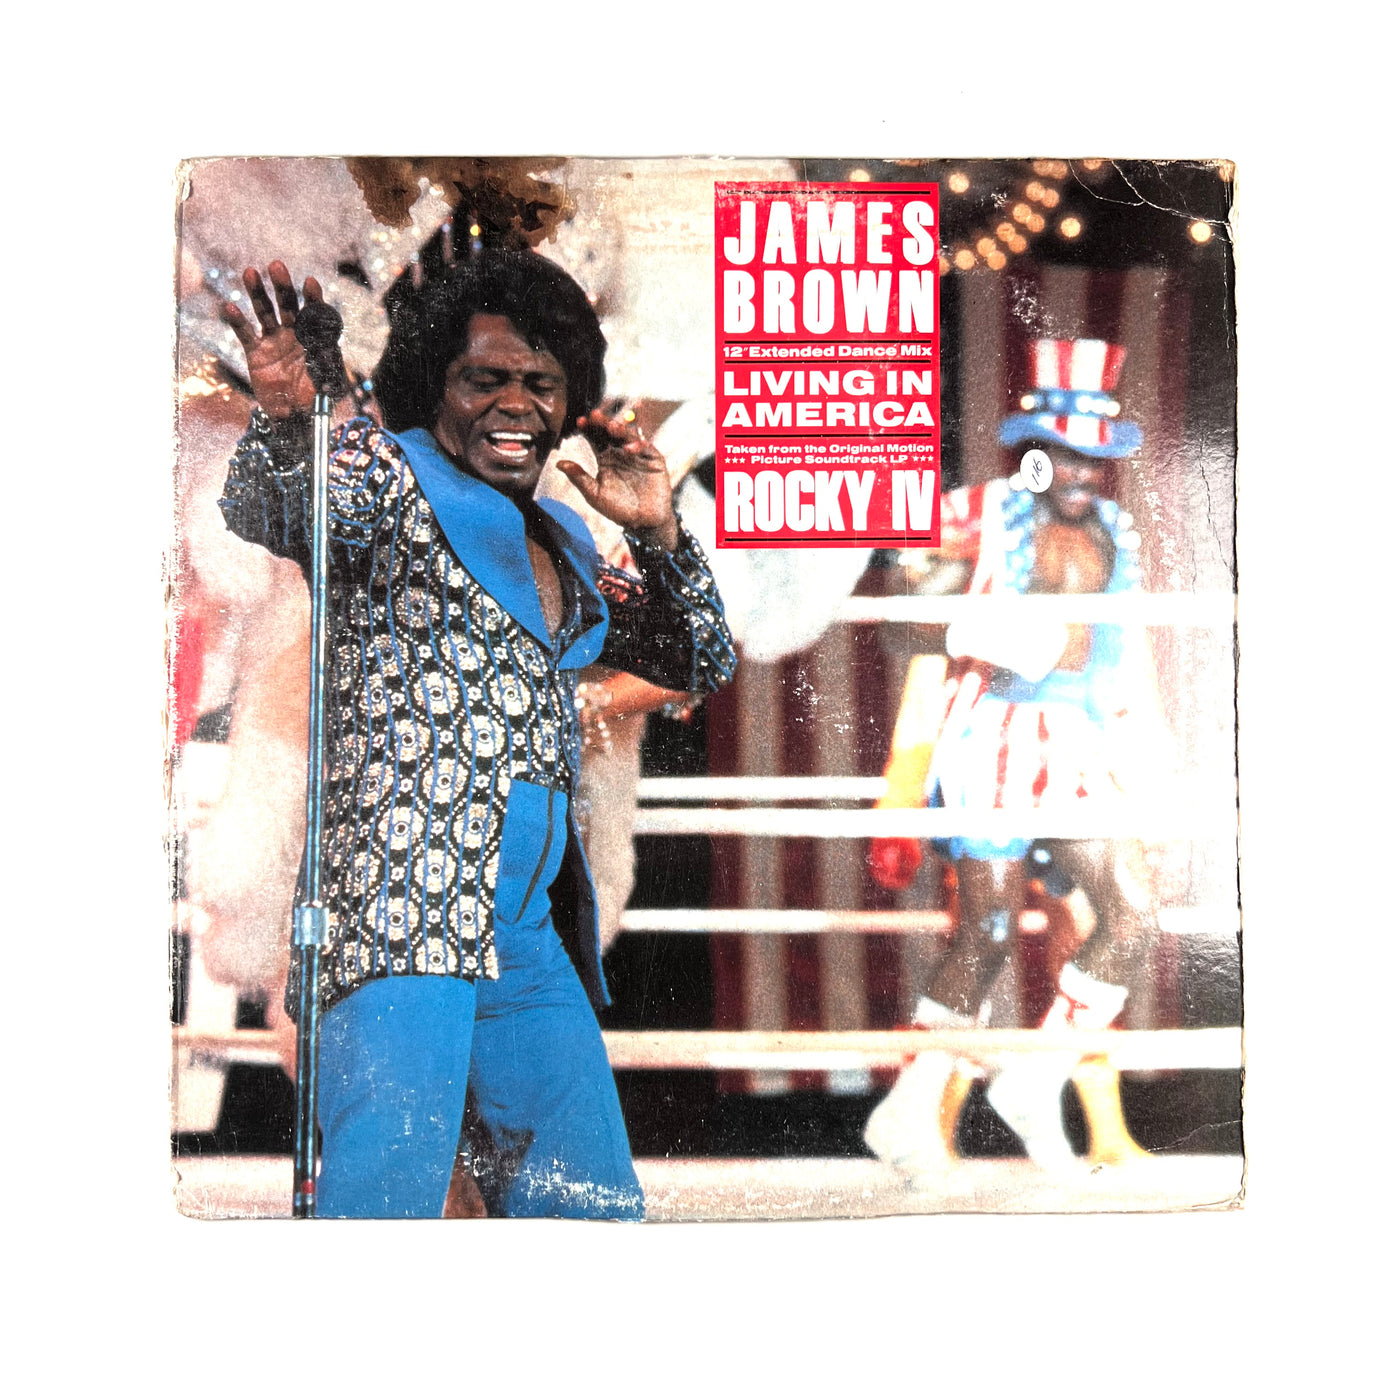 James Brown - Living In America (12" Extended Dance Mix)